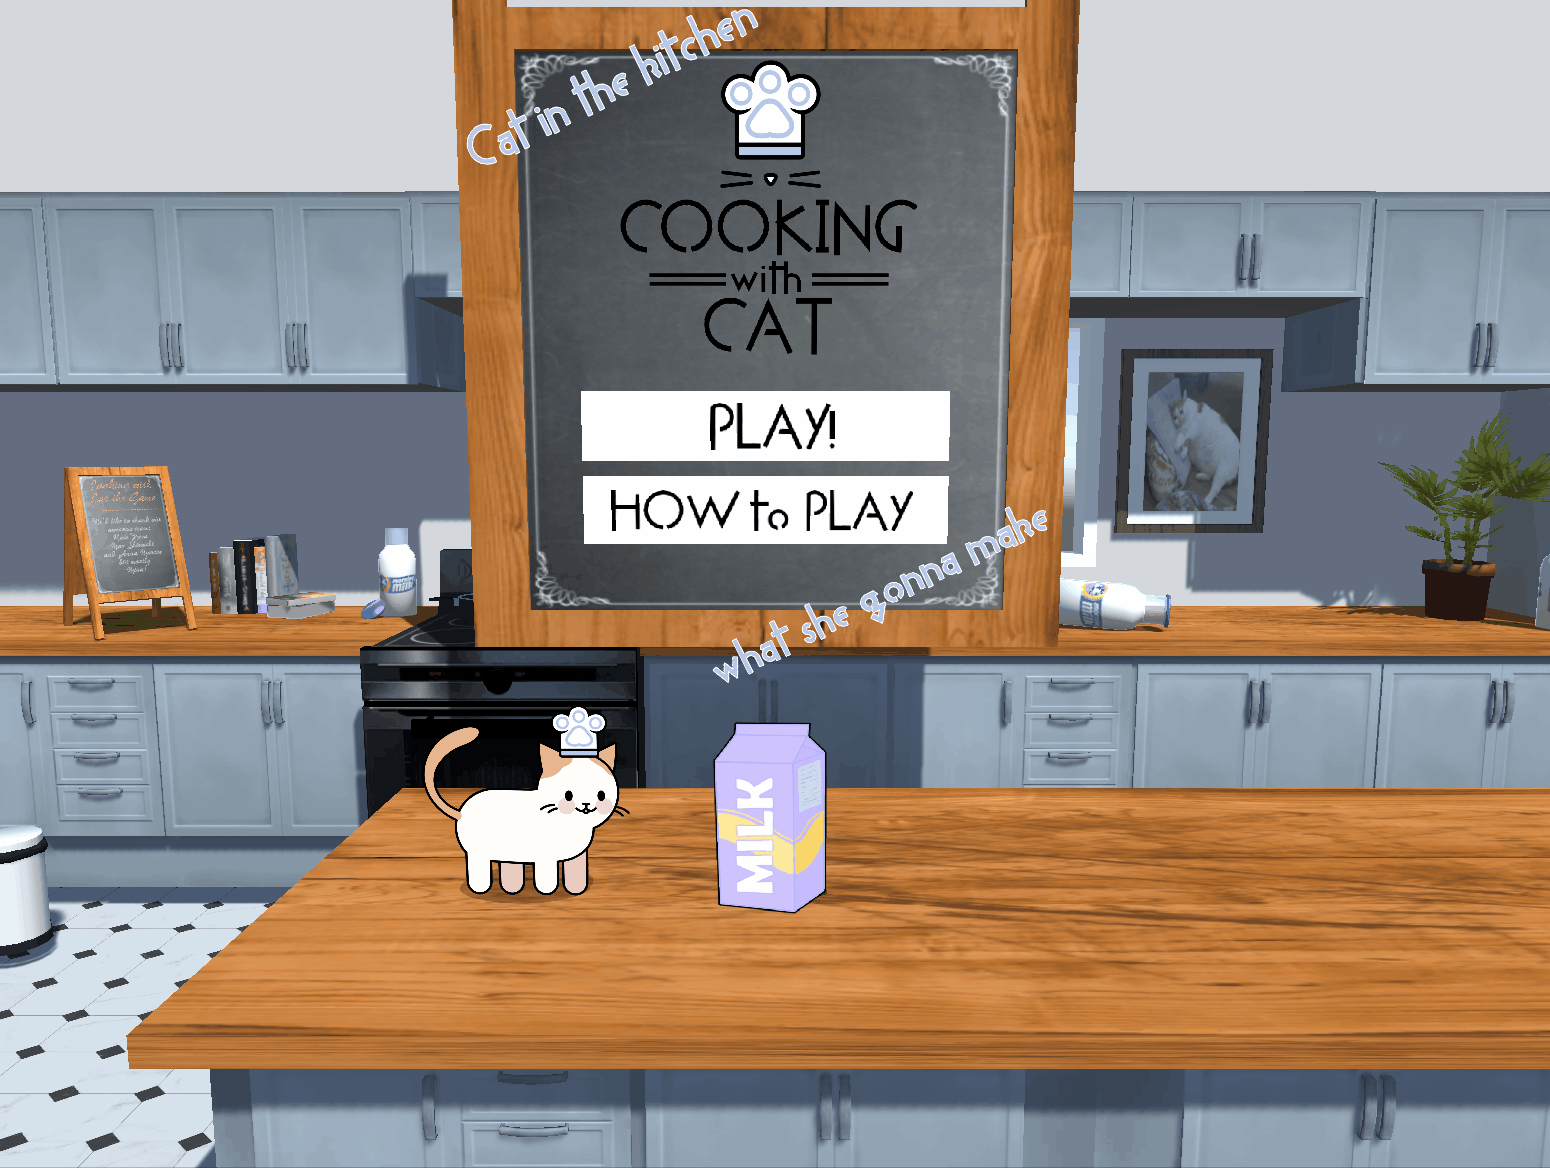 Cooking cat. Cat Cooking. Cat and the Cook moral. Cat Cooks food youtube.